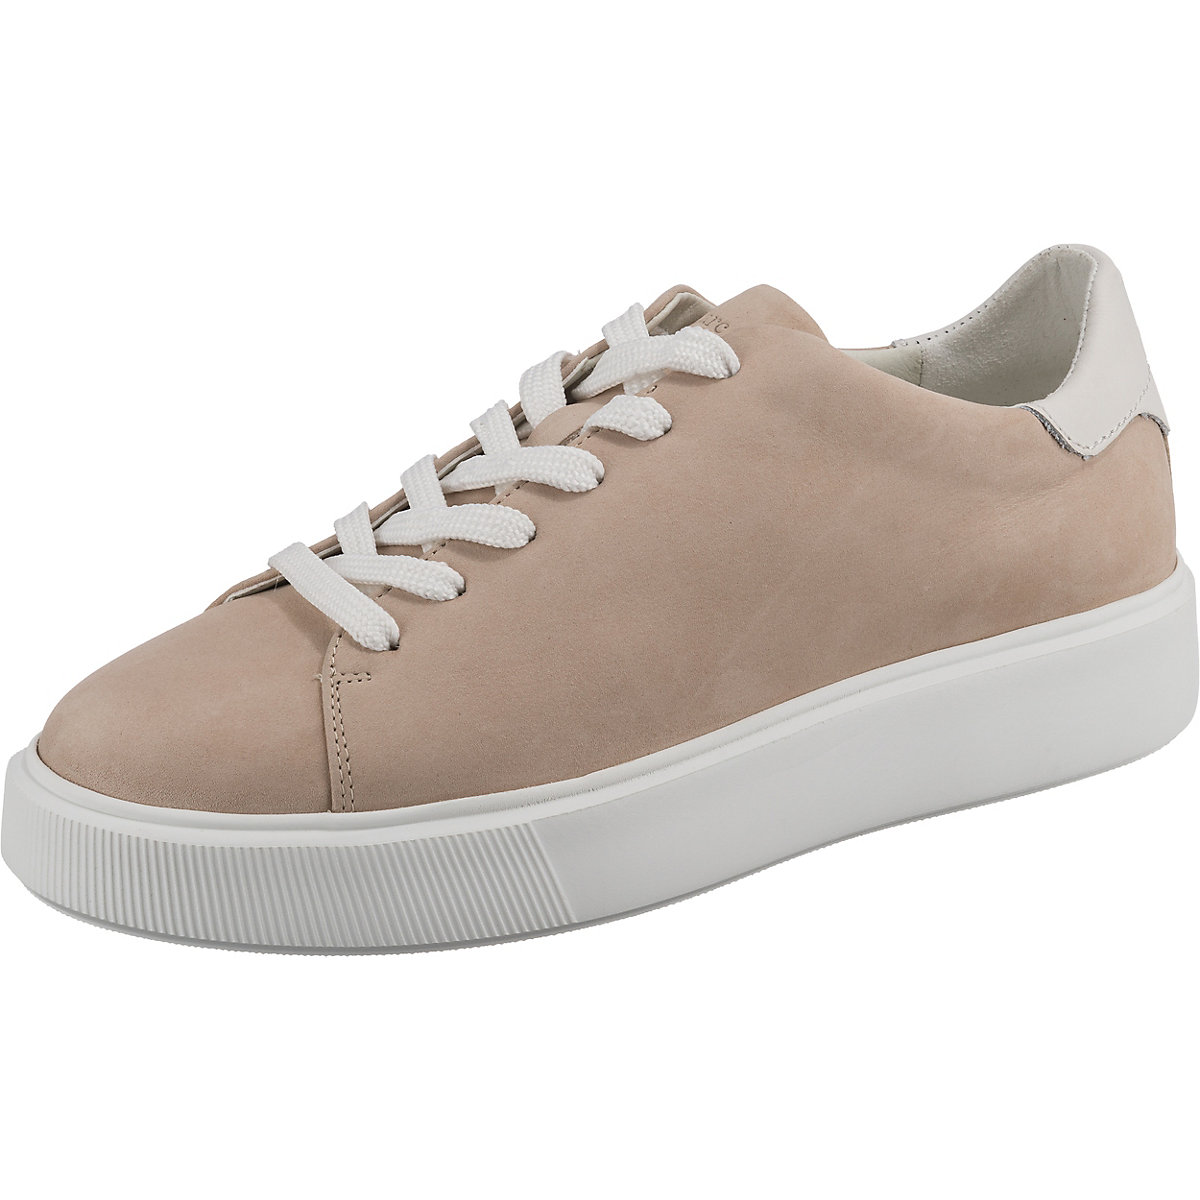 Marc O'Polo Cora 1c Sneakers Low beige